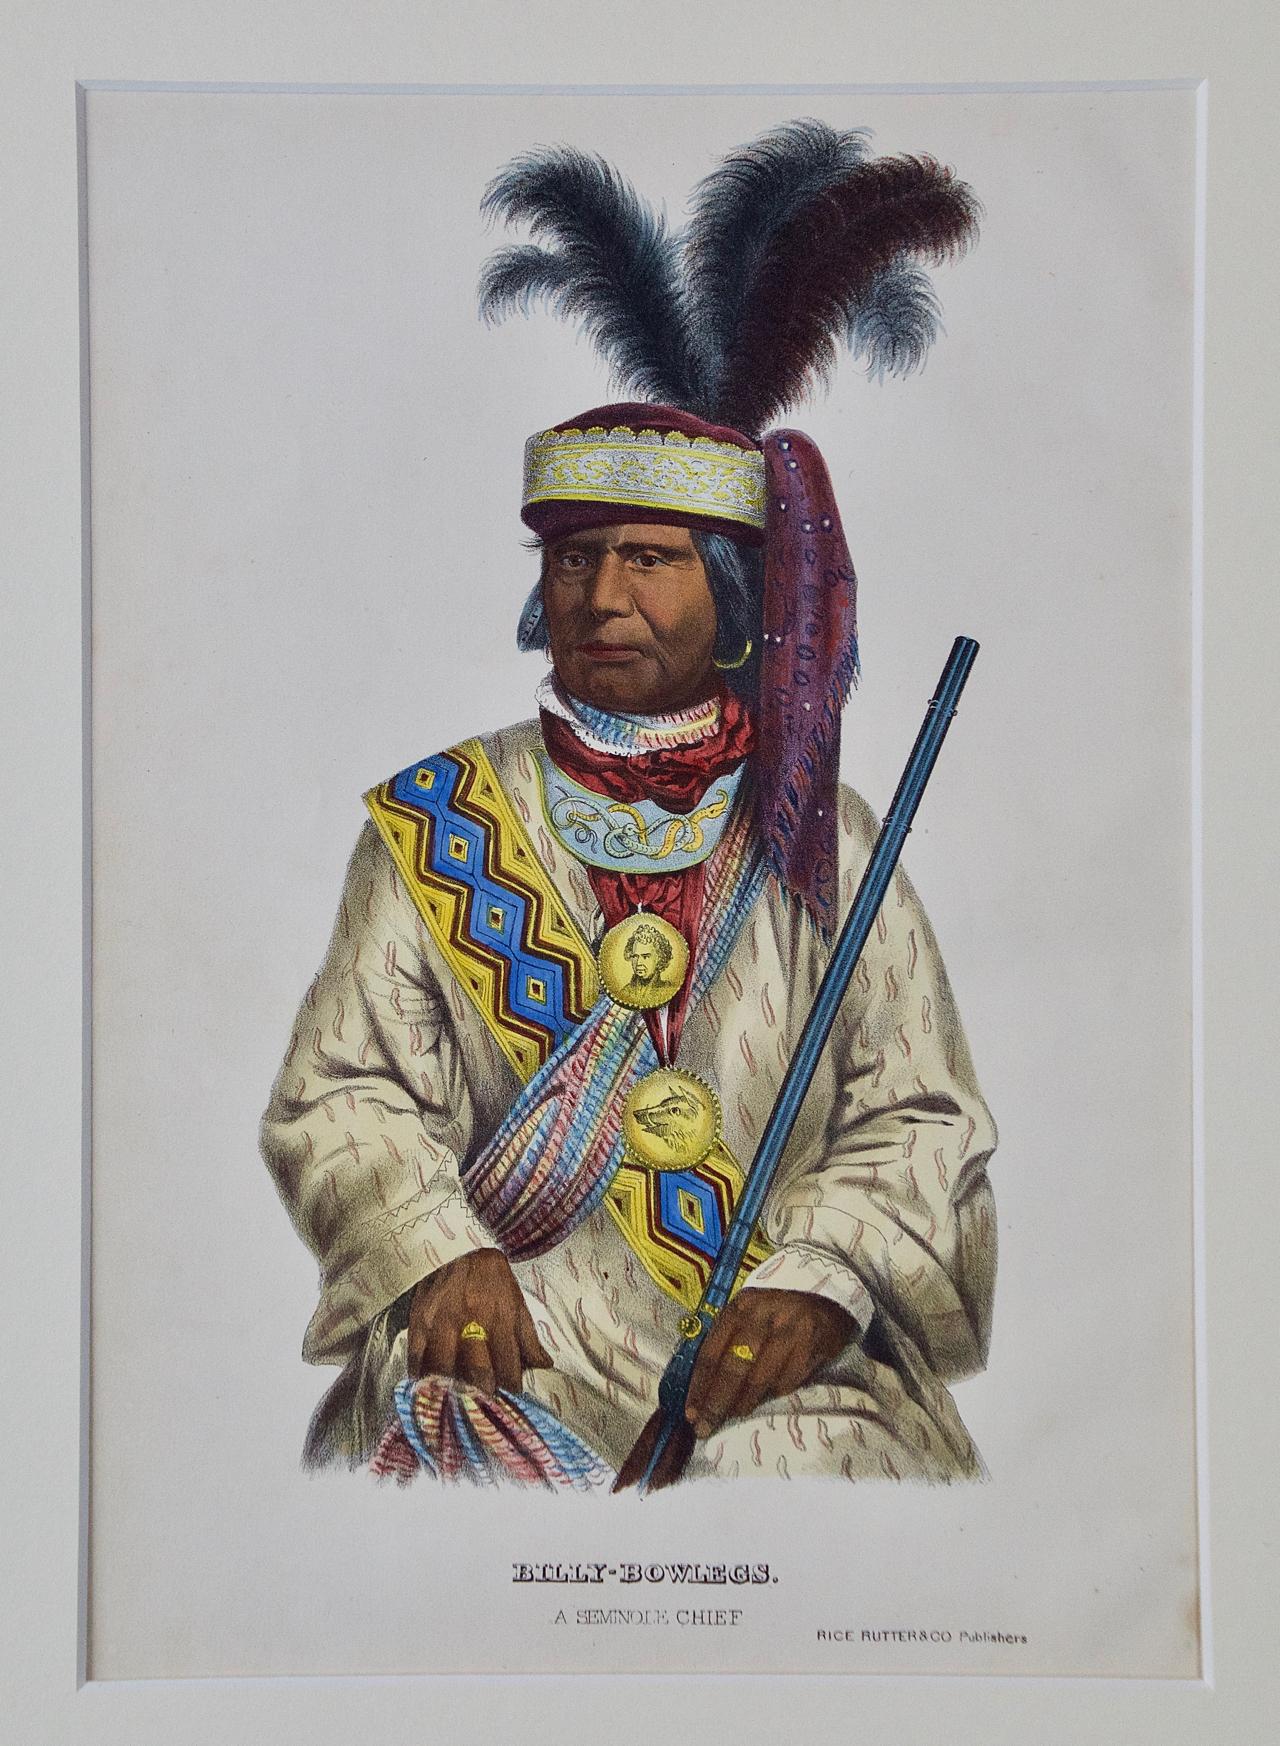 Billy Bowlegs, Seminole Chief: Original McKenney & Hall Hand-colored Lithograph 